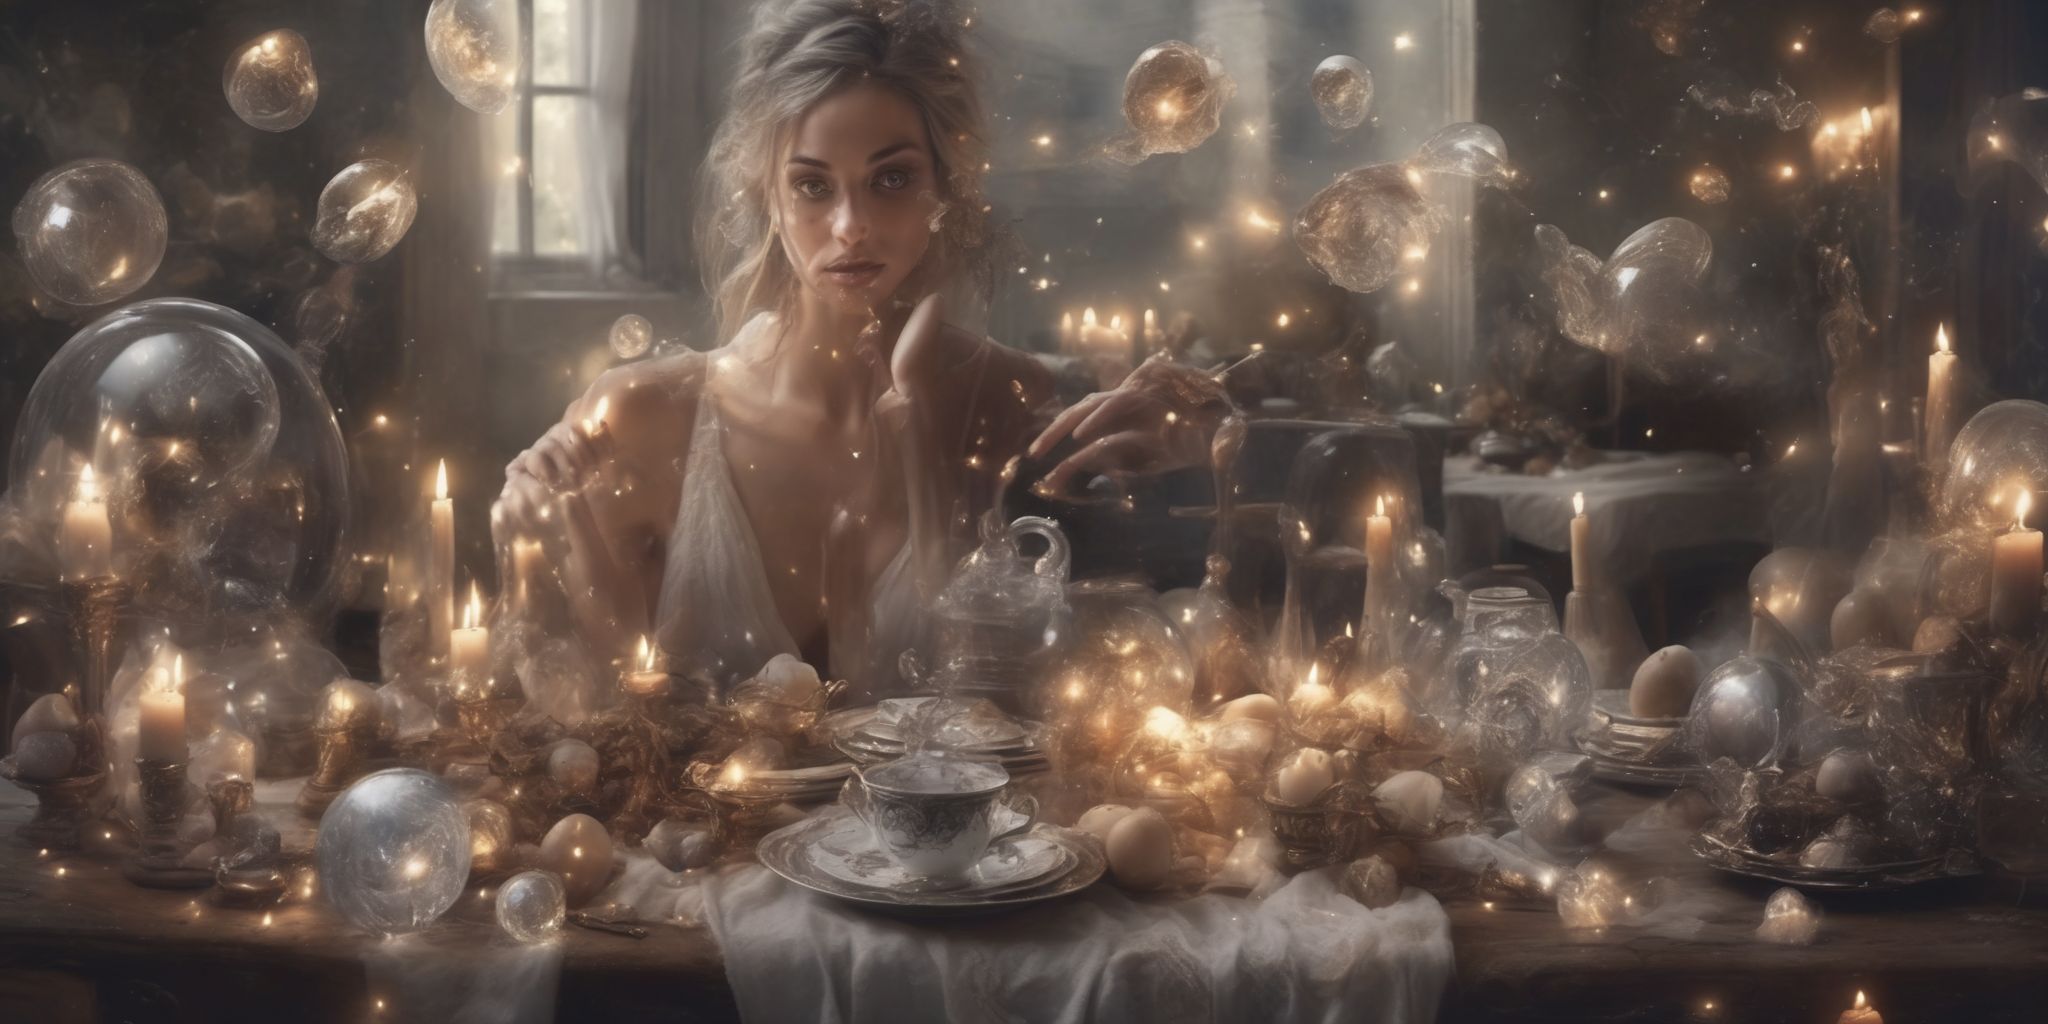 Magic  in realistic, photographic style